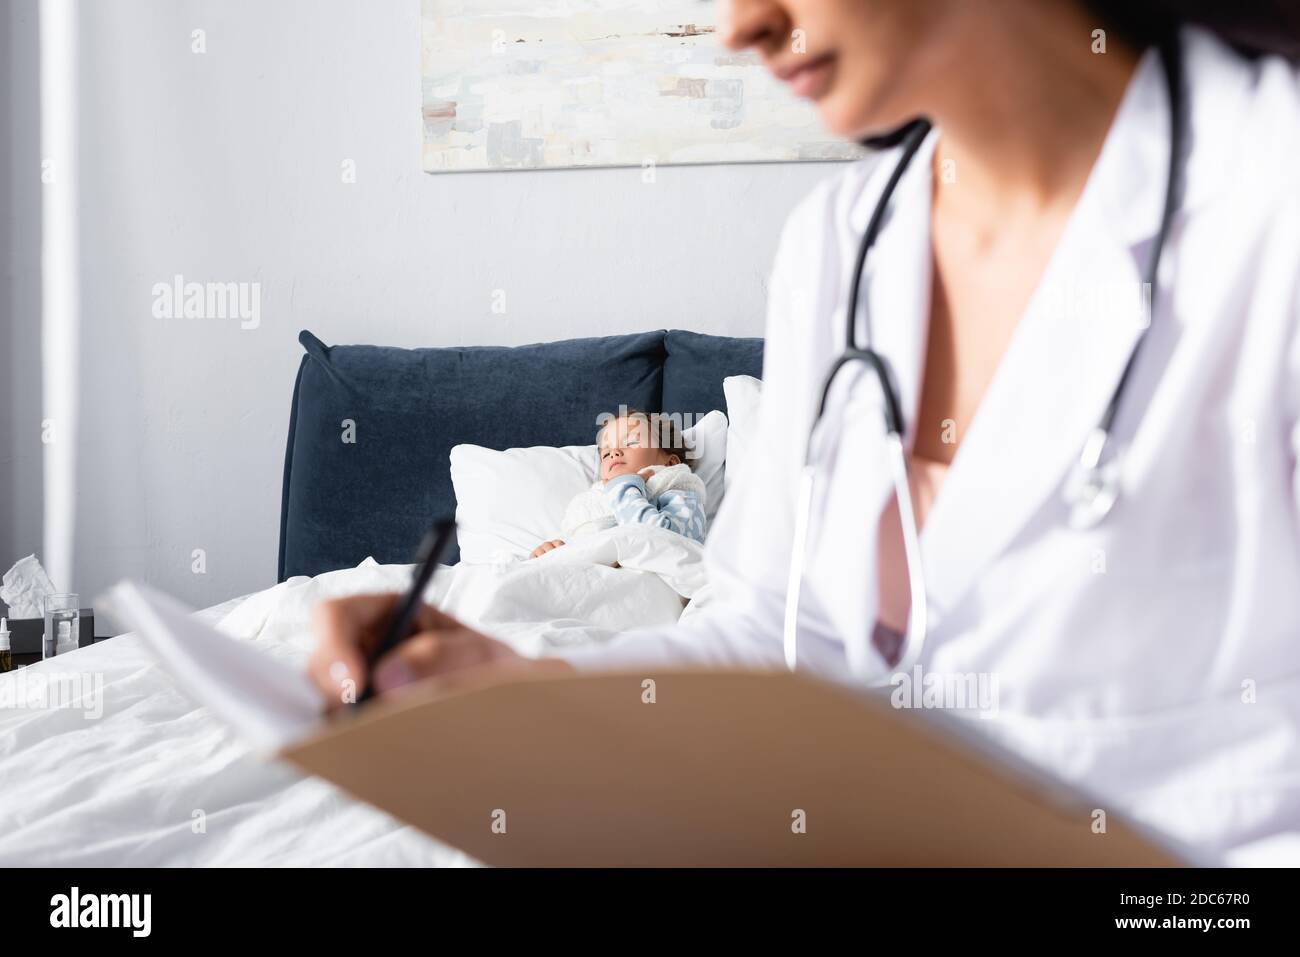 ill child lying in bed while pediatrician writing diagnosis on blurred foreground Stock Photo